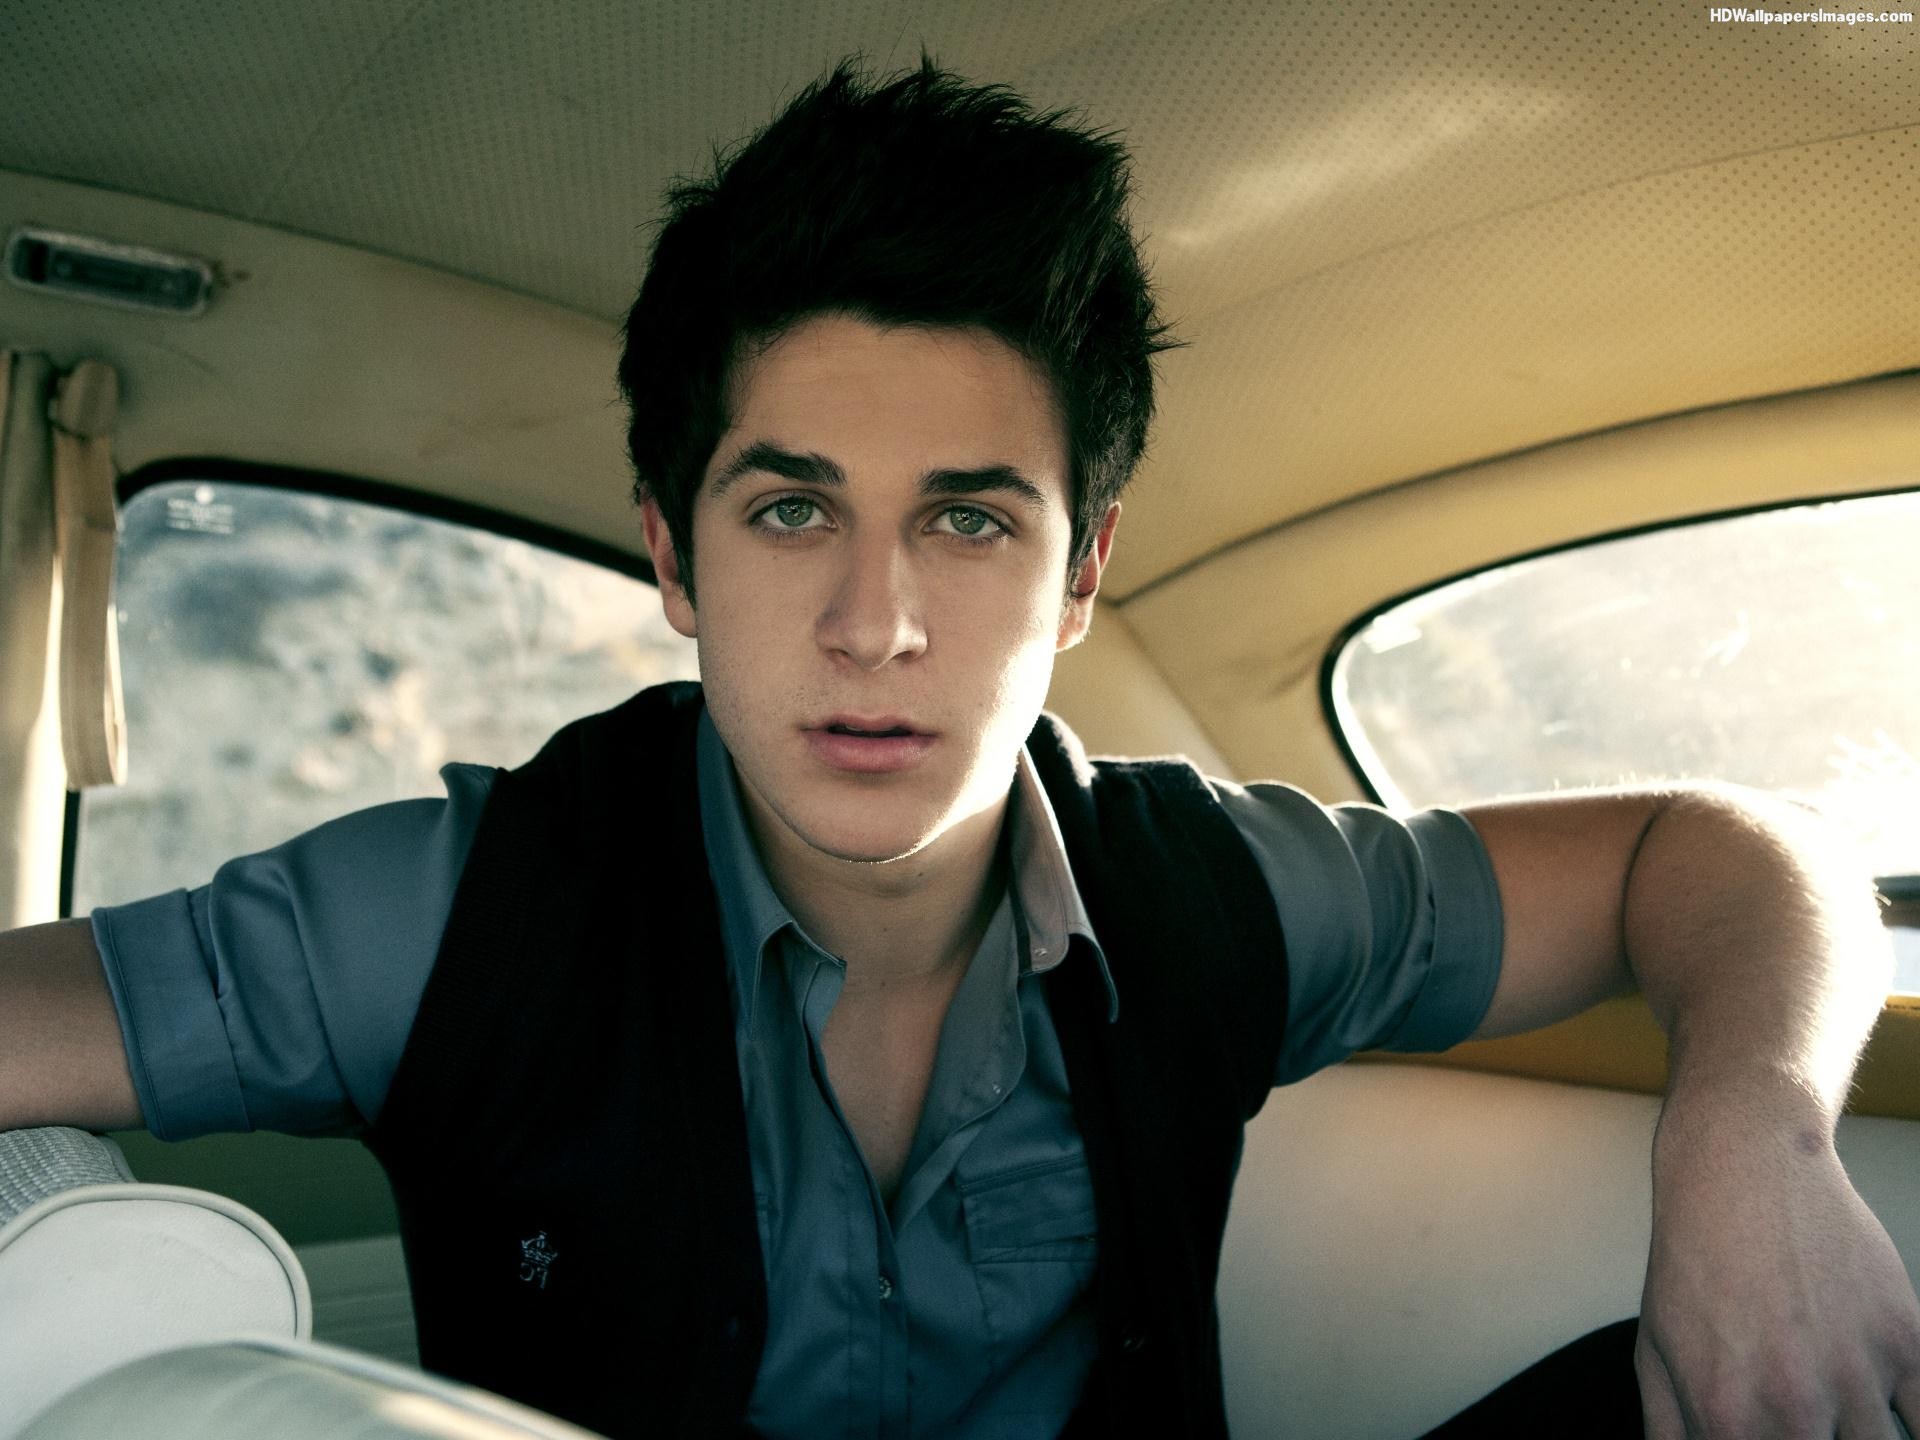 Pictures of David Henrie, Picture #252879 - Pictures Of Celebrities